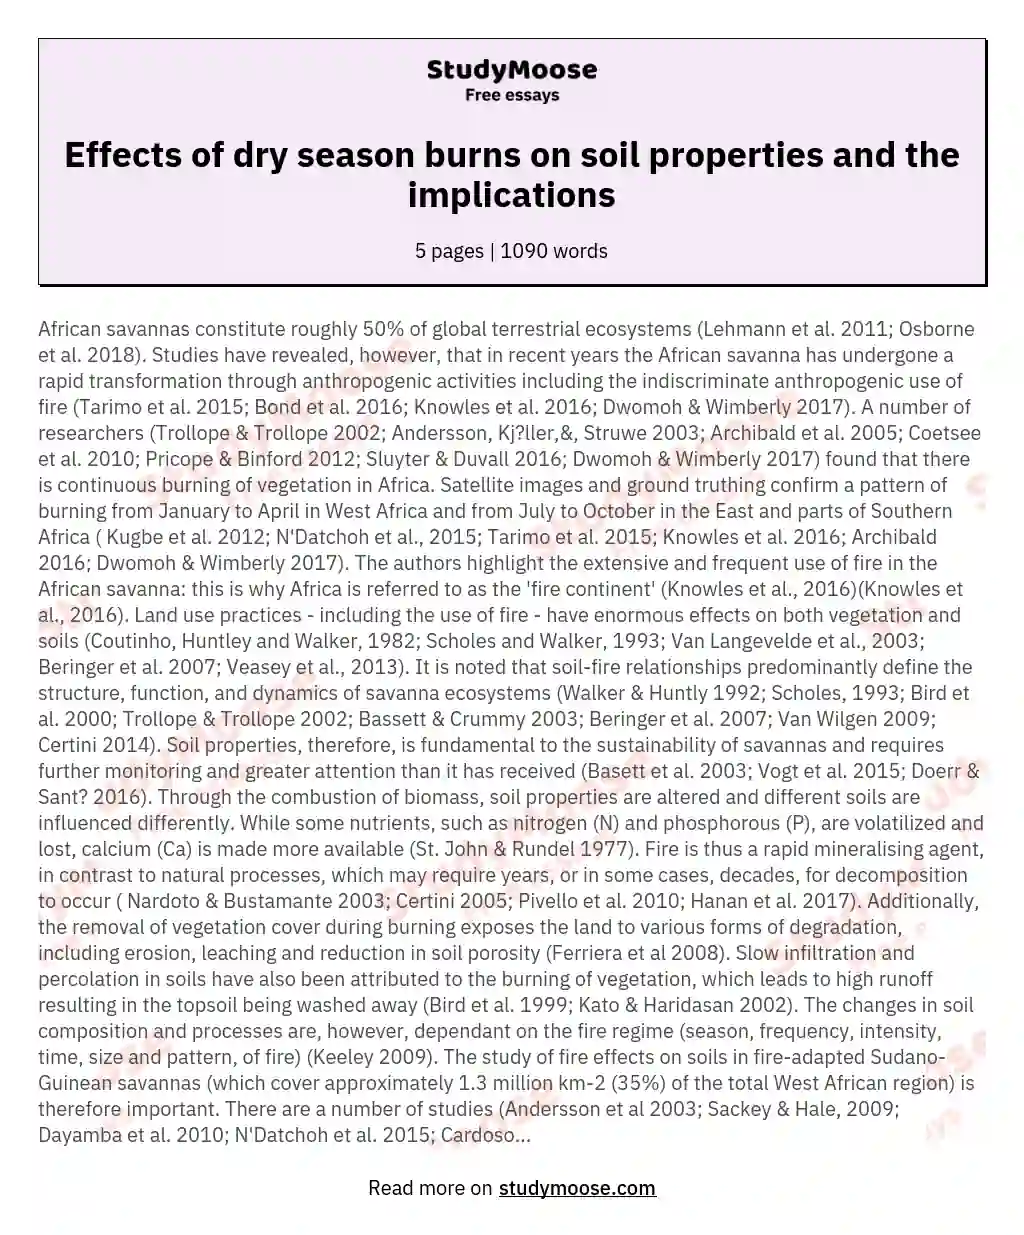 Effects of dry season burns on soil properties and the implications